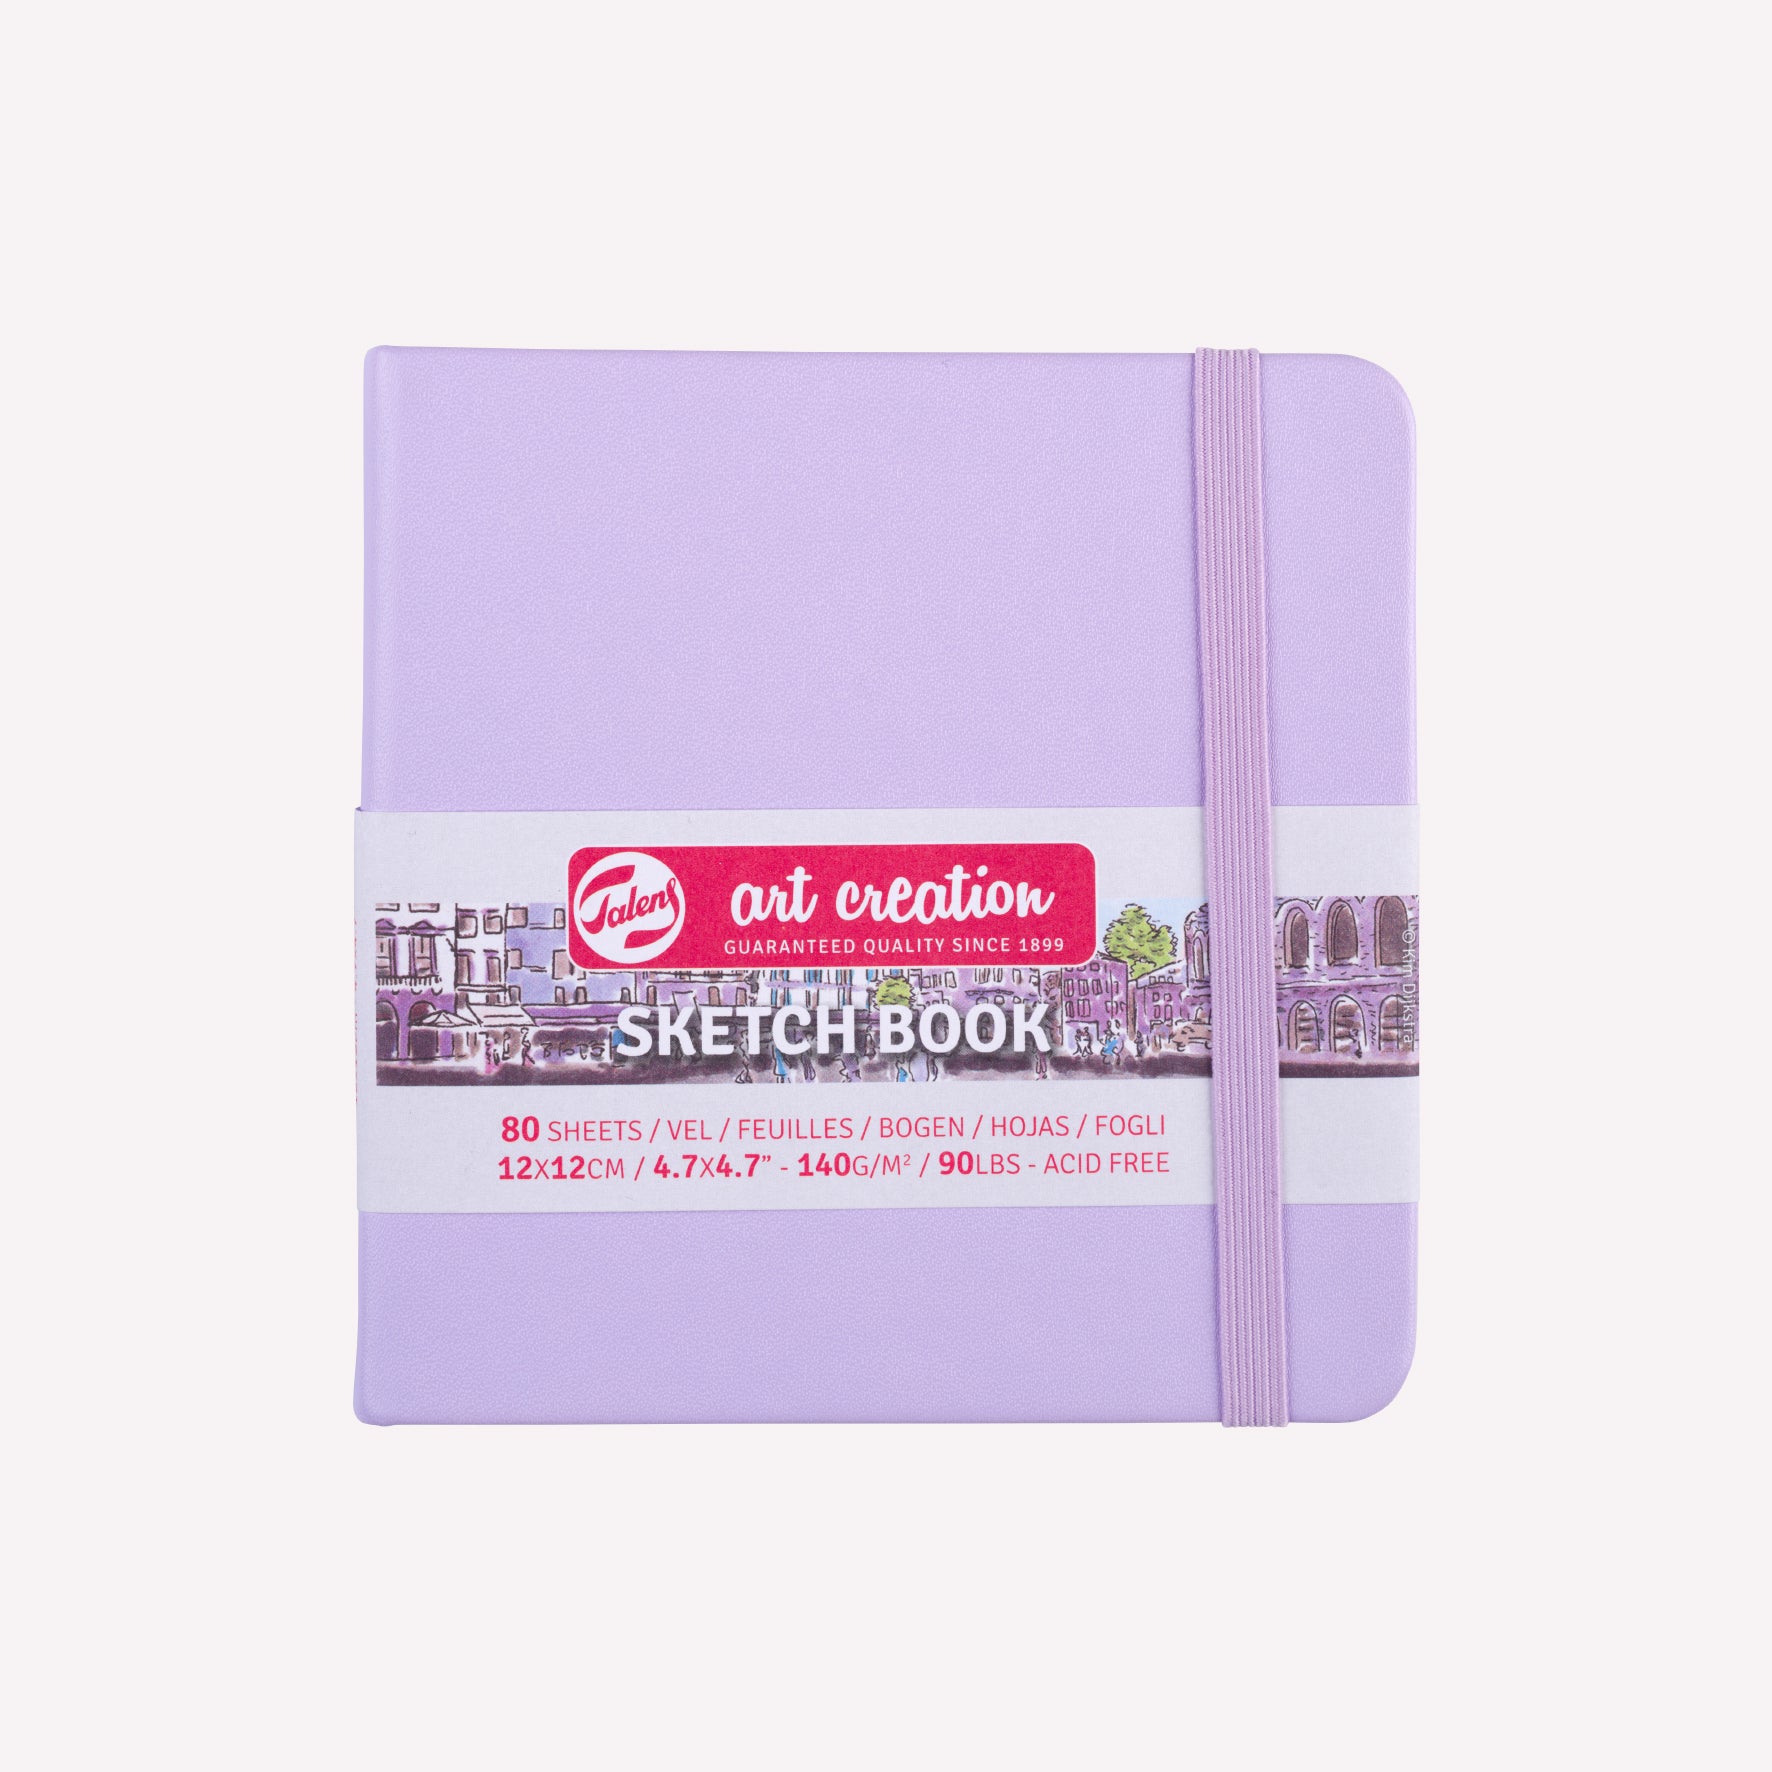 Royal Talens Art Creation pocket sized sketchbook with a sturdy Pastel Violet imitation-leather cover in size 12x12cm.